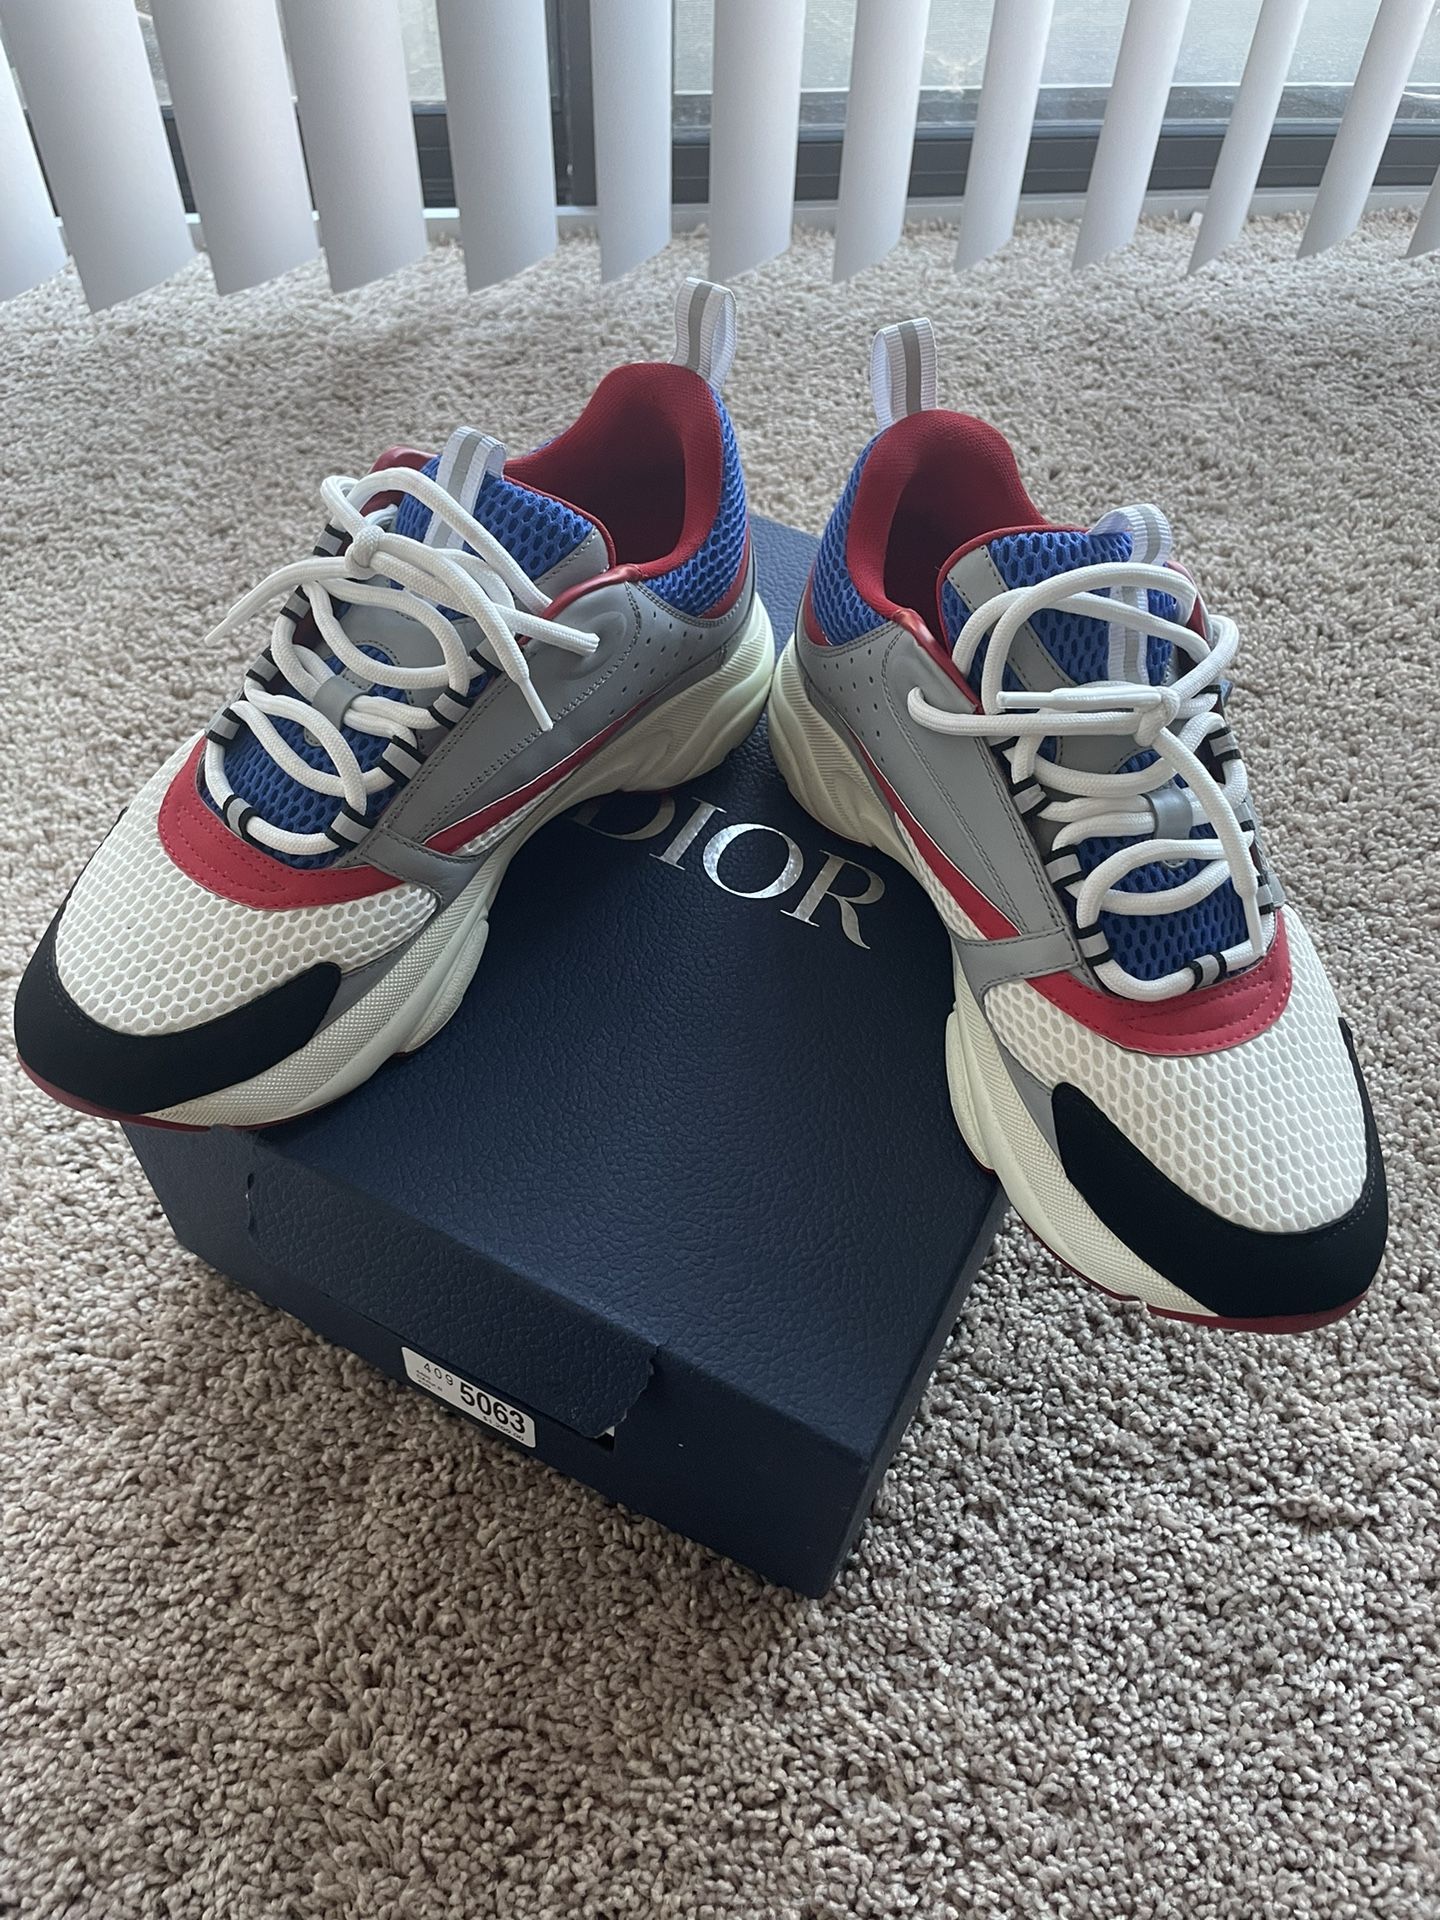 dior b22 red/blue/white size 42/9 AUTHENTIC for Sale in Washington